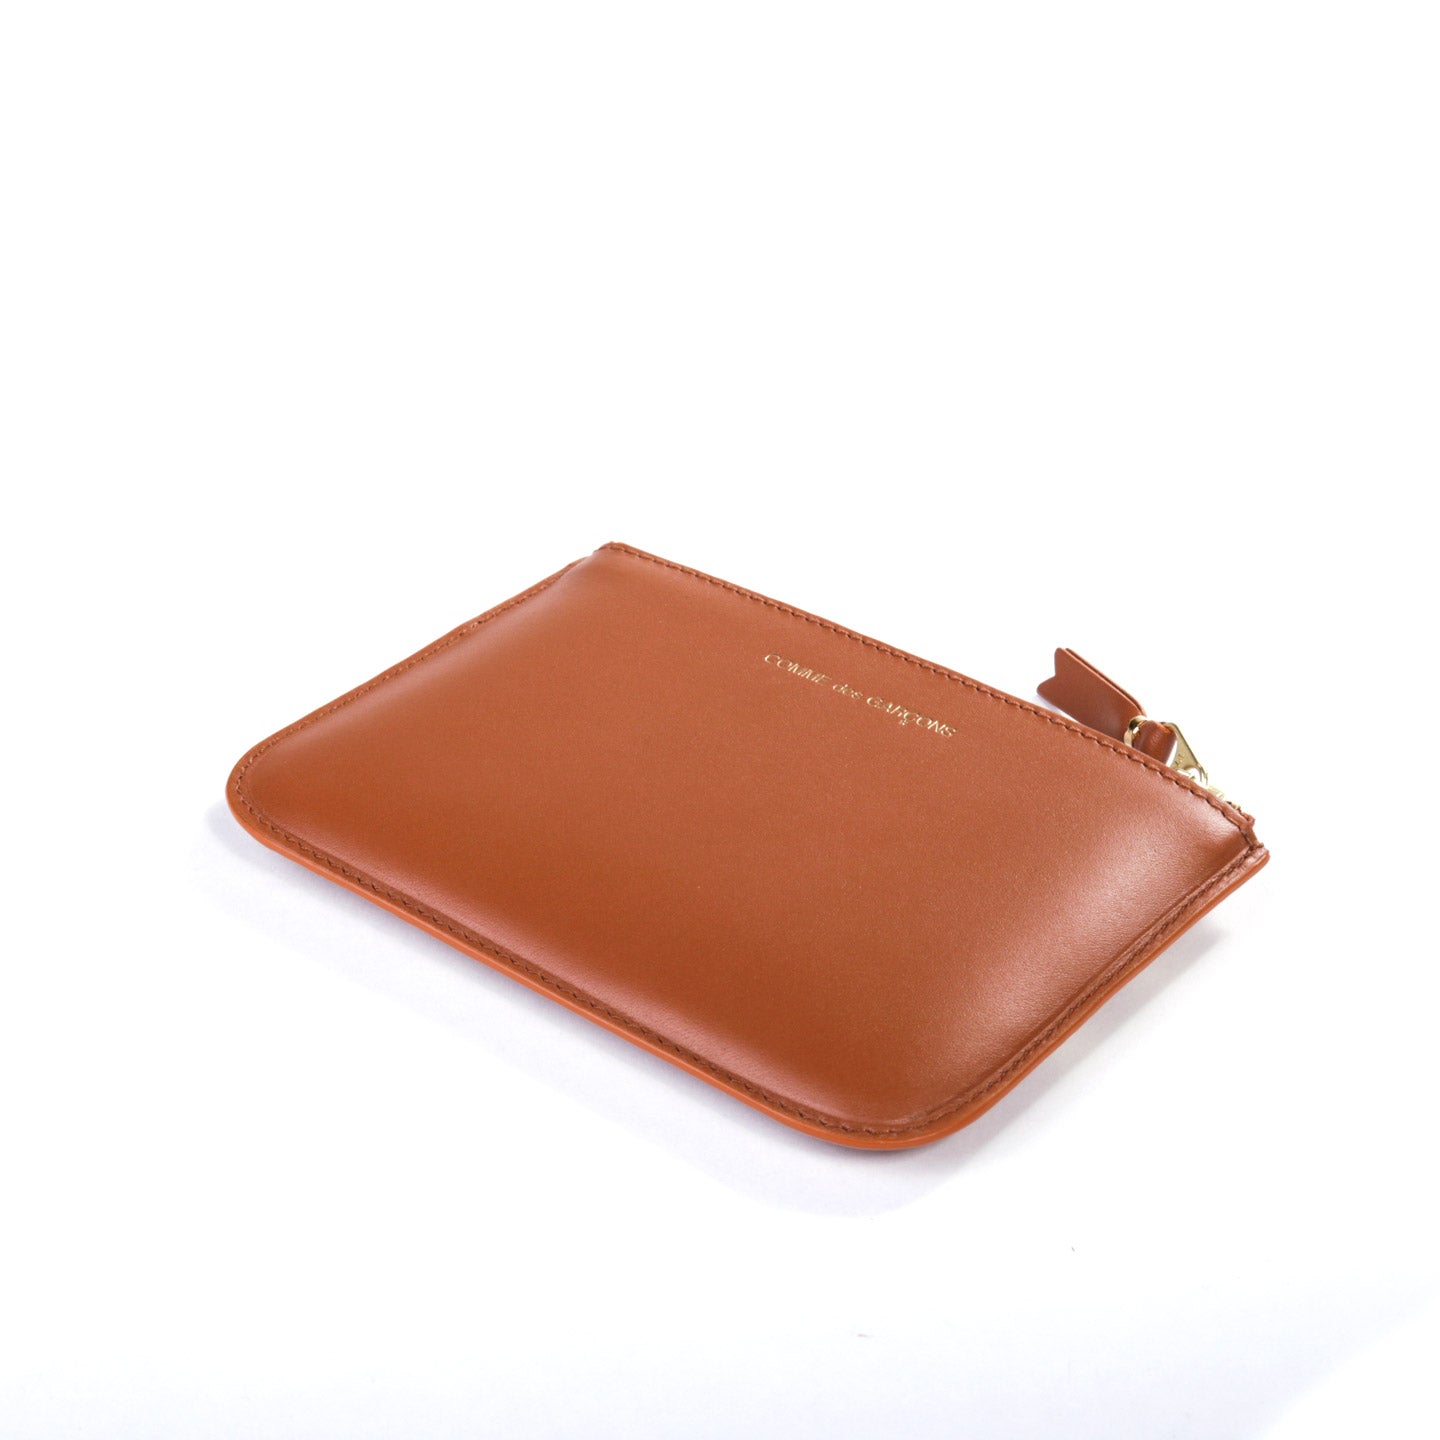 COMME DES GARCONS SA8100 RUBY EYES ZIP WALLET BROWN